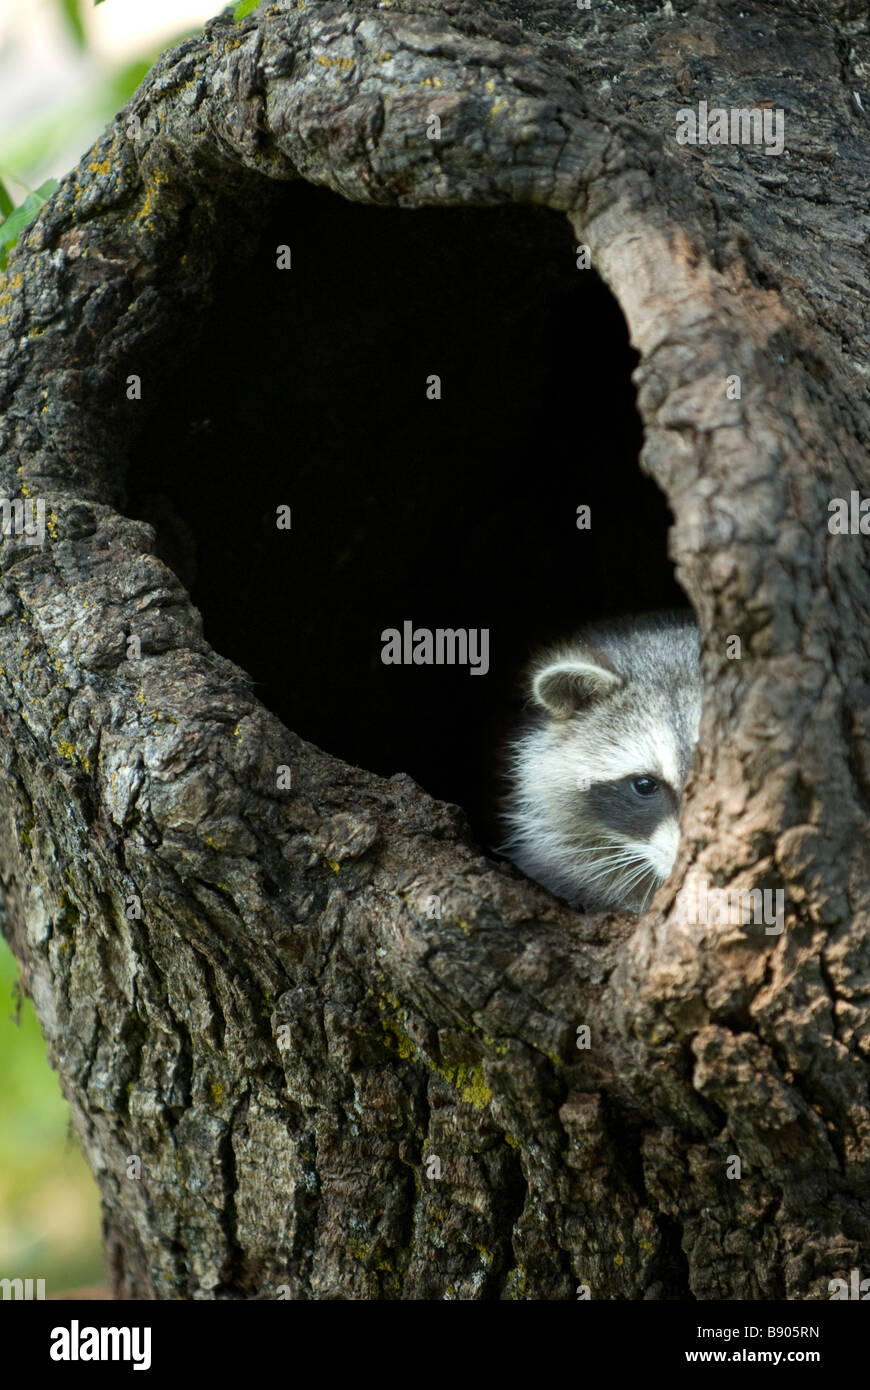 Raccoon peeking out from a hole in a tree trunk Stock Photo